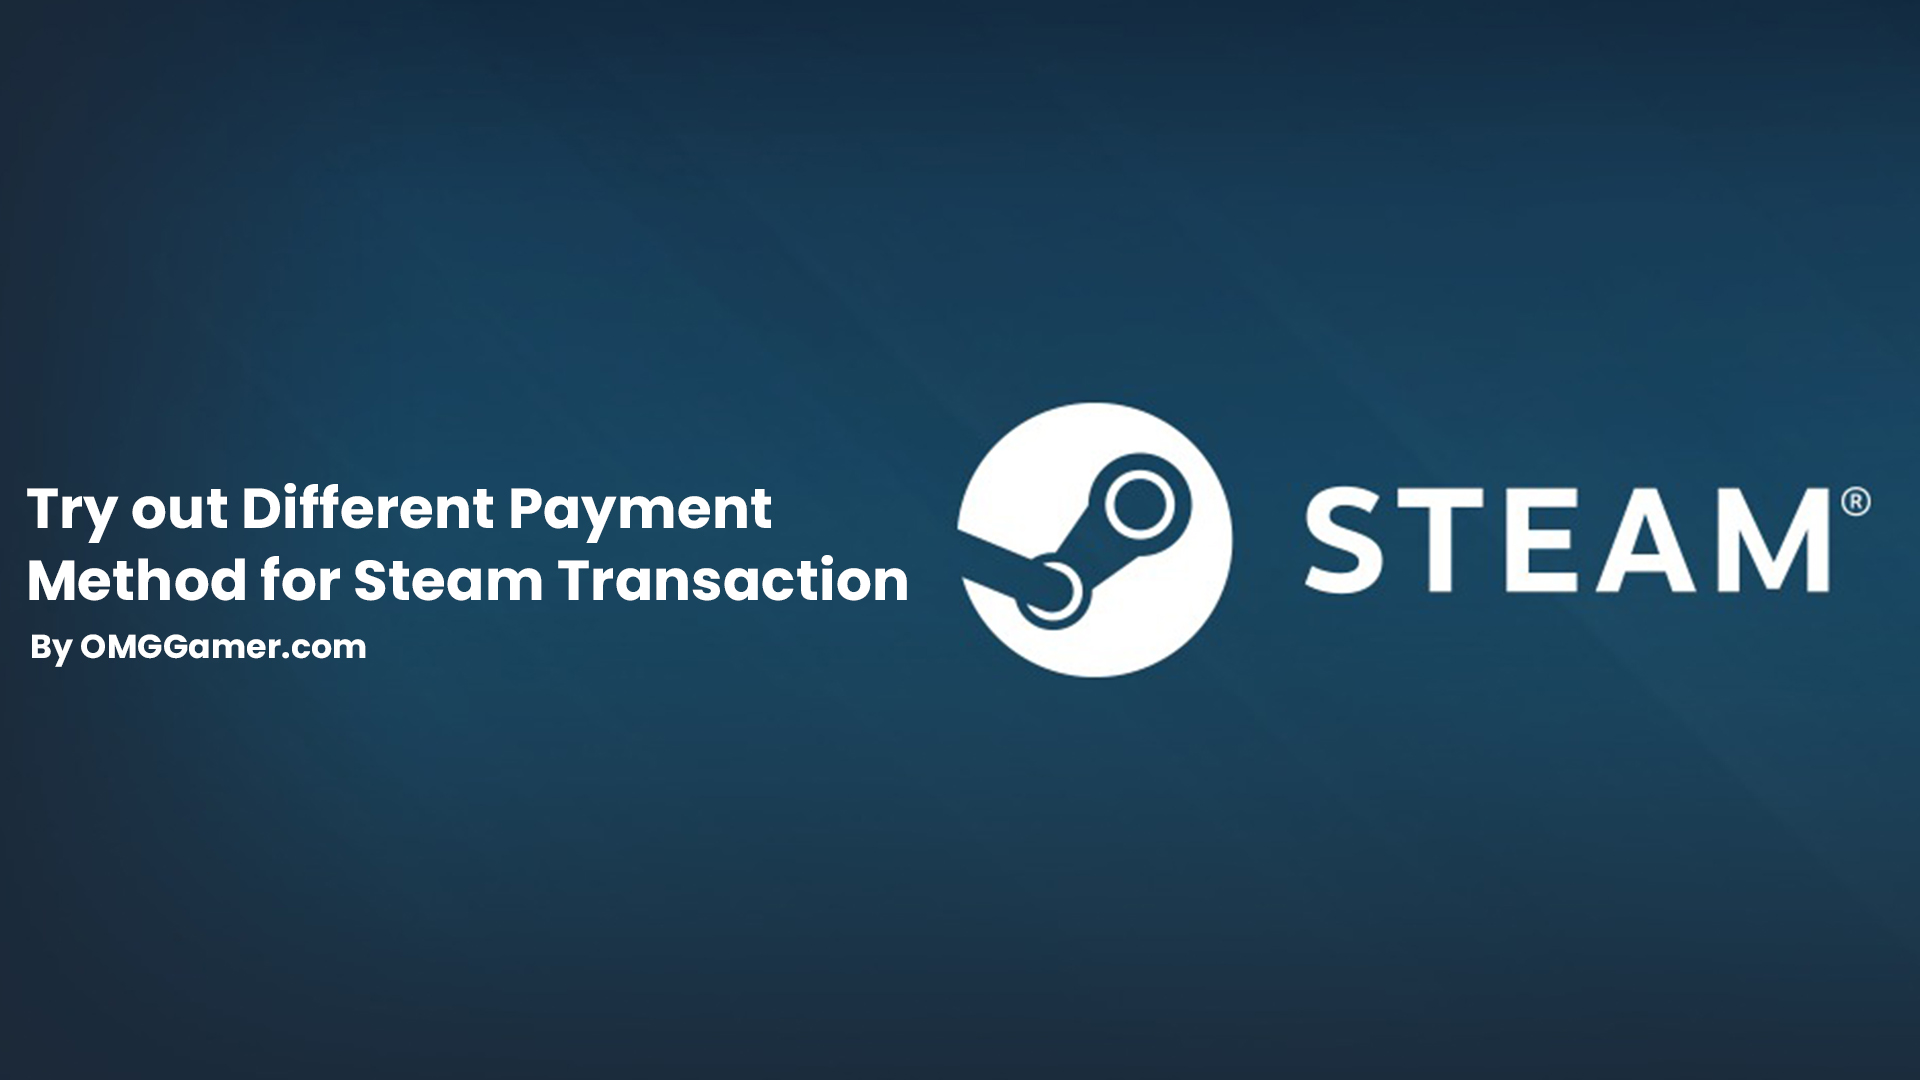 Try out Different Payment Method for Steam Transaction